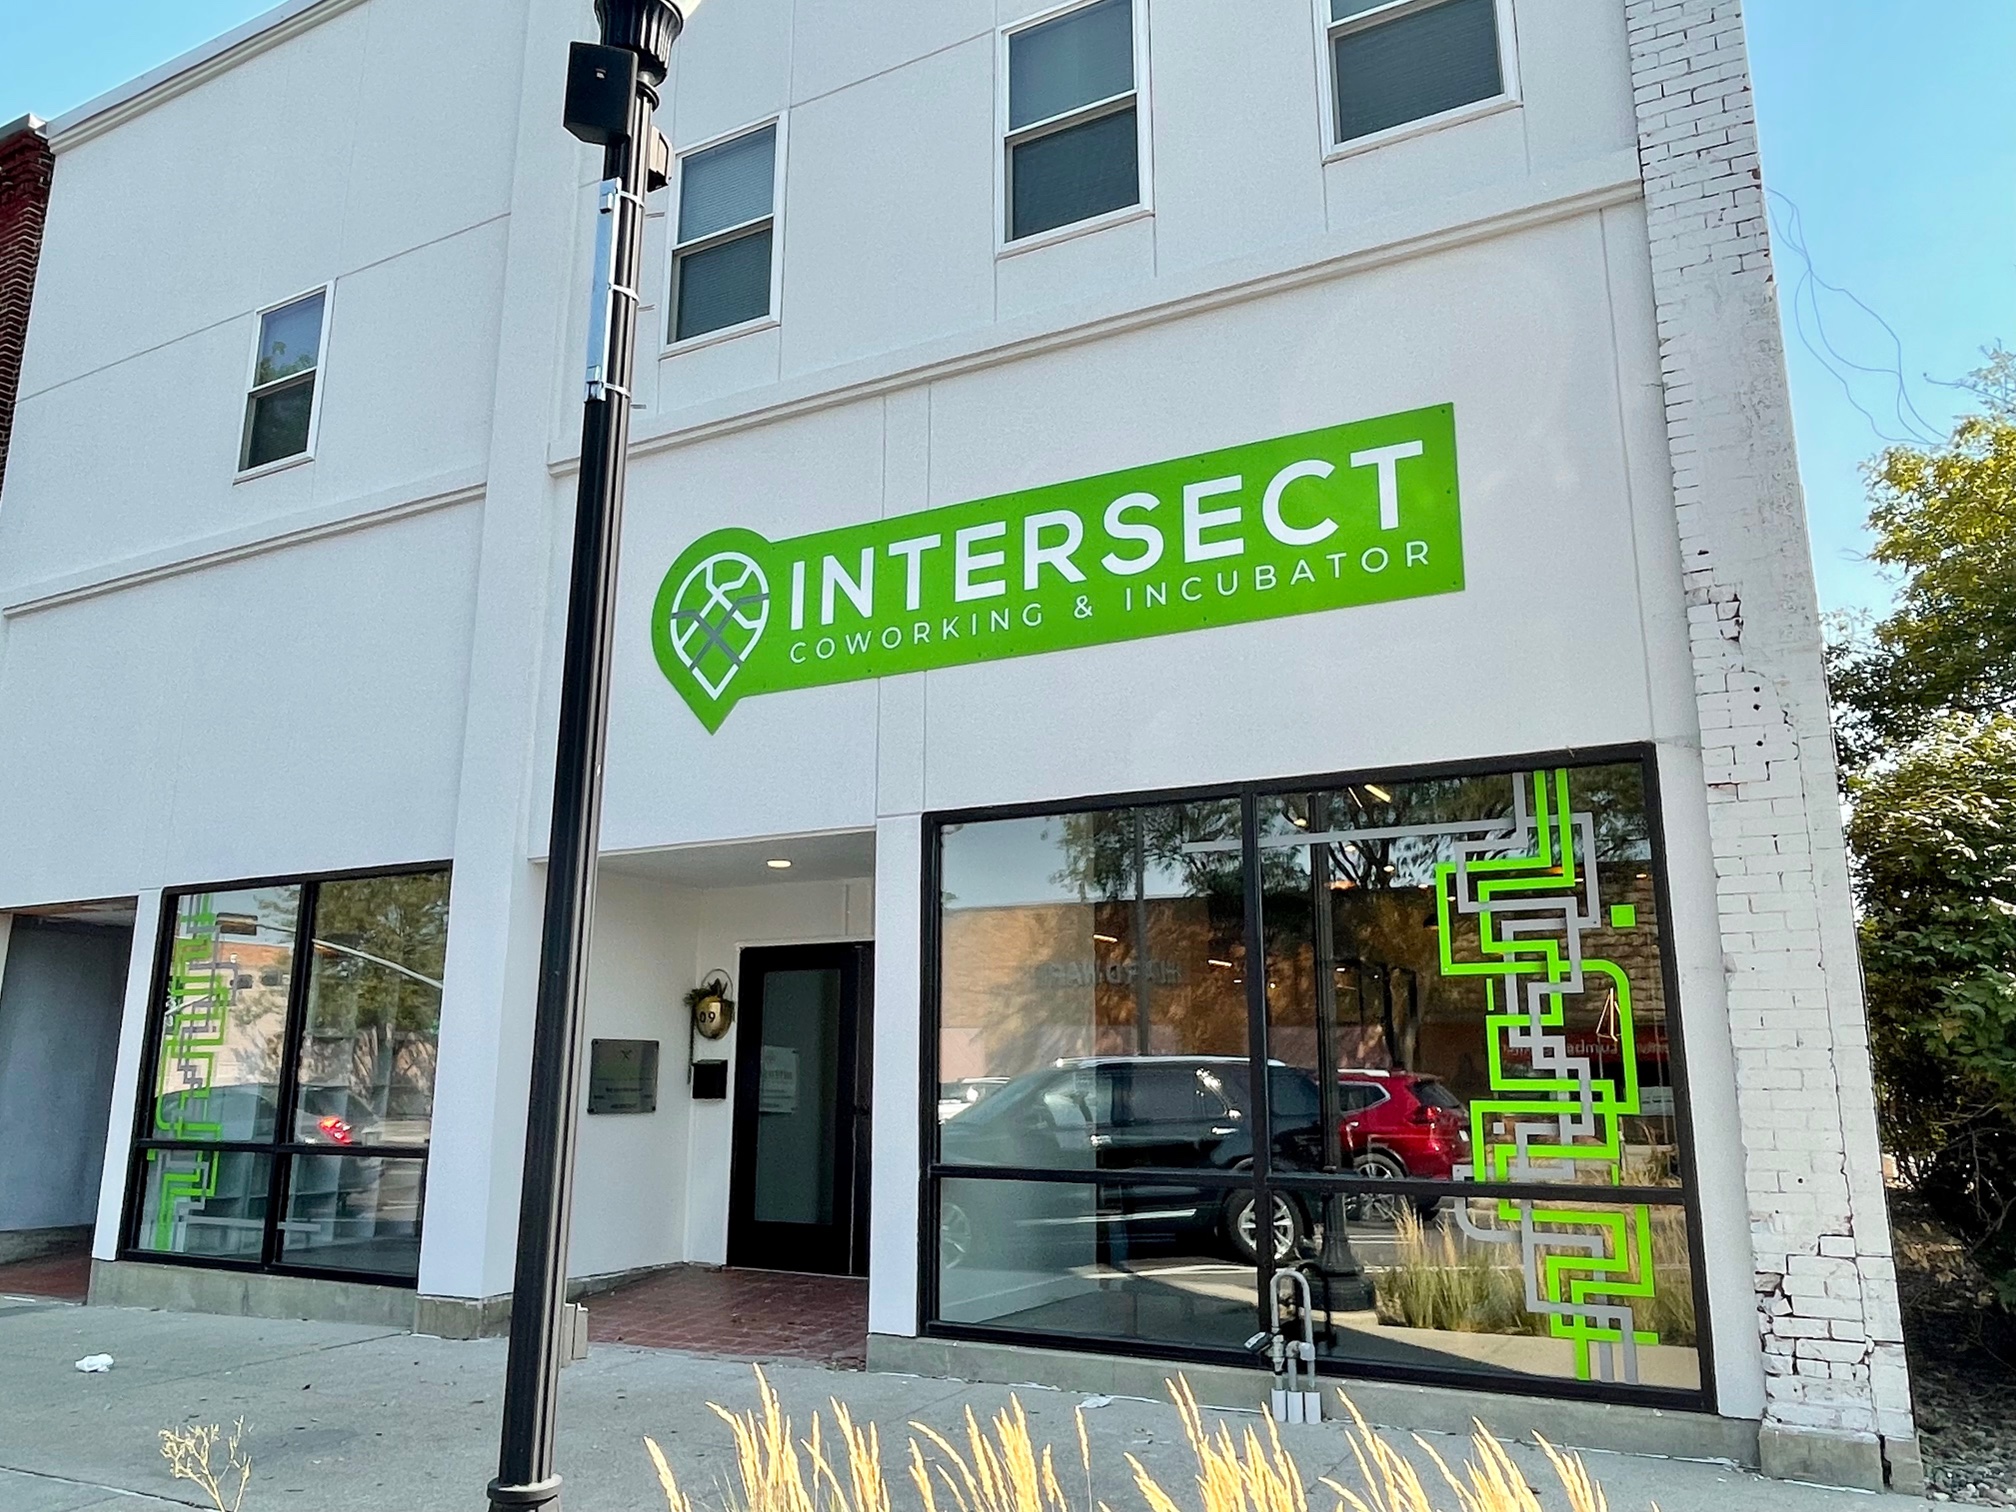 Intersect Coworking and Incubator in Downtown Norfolk